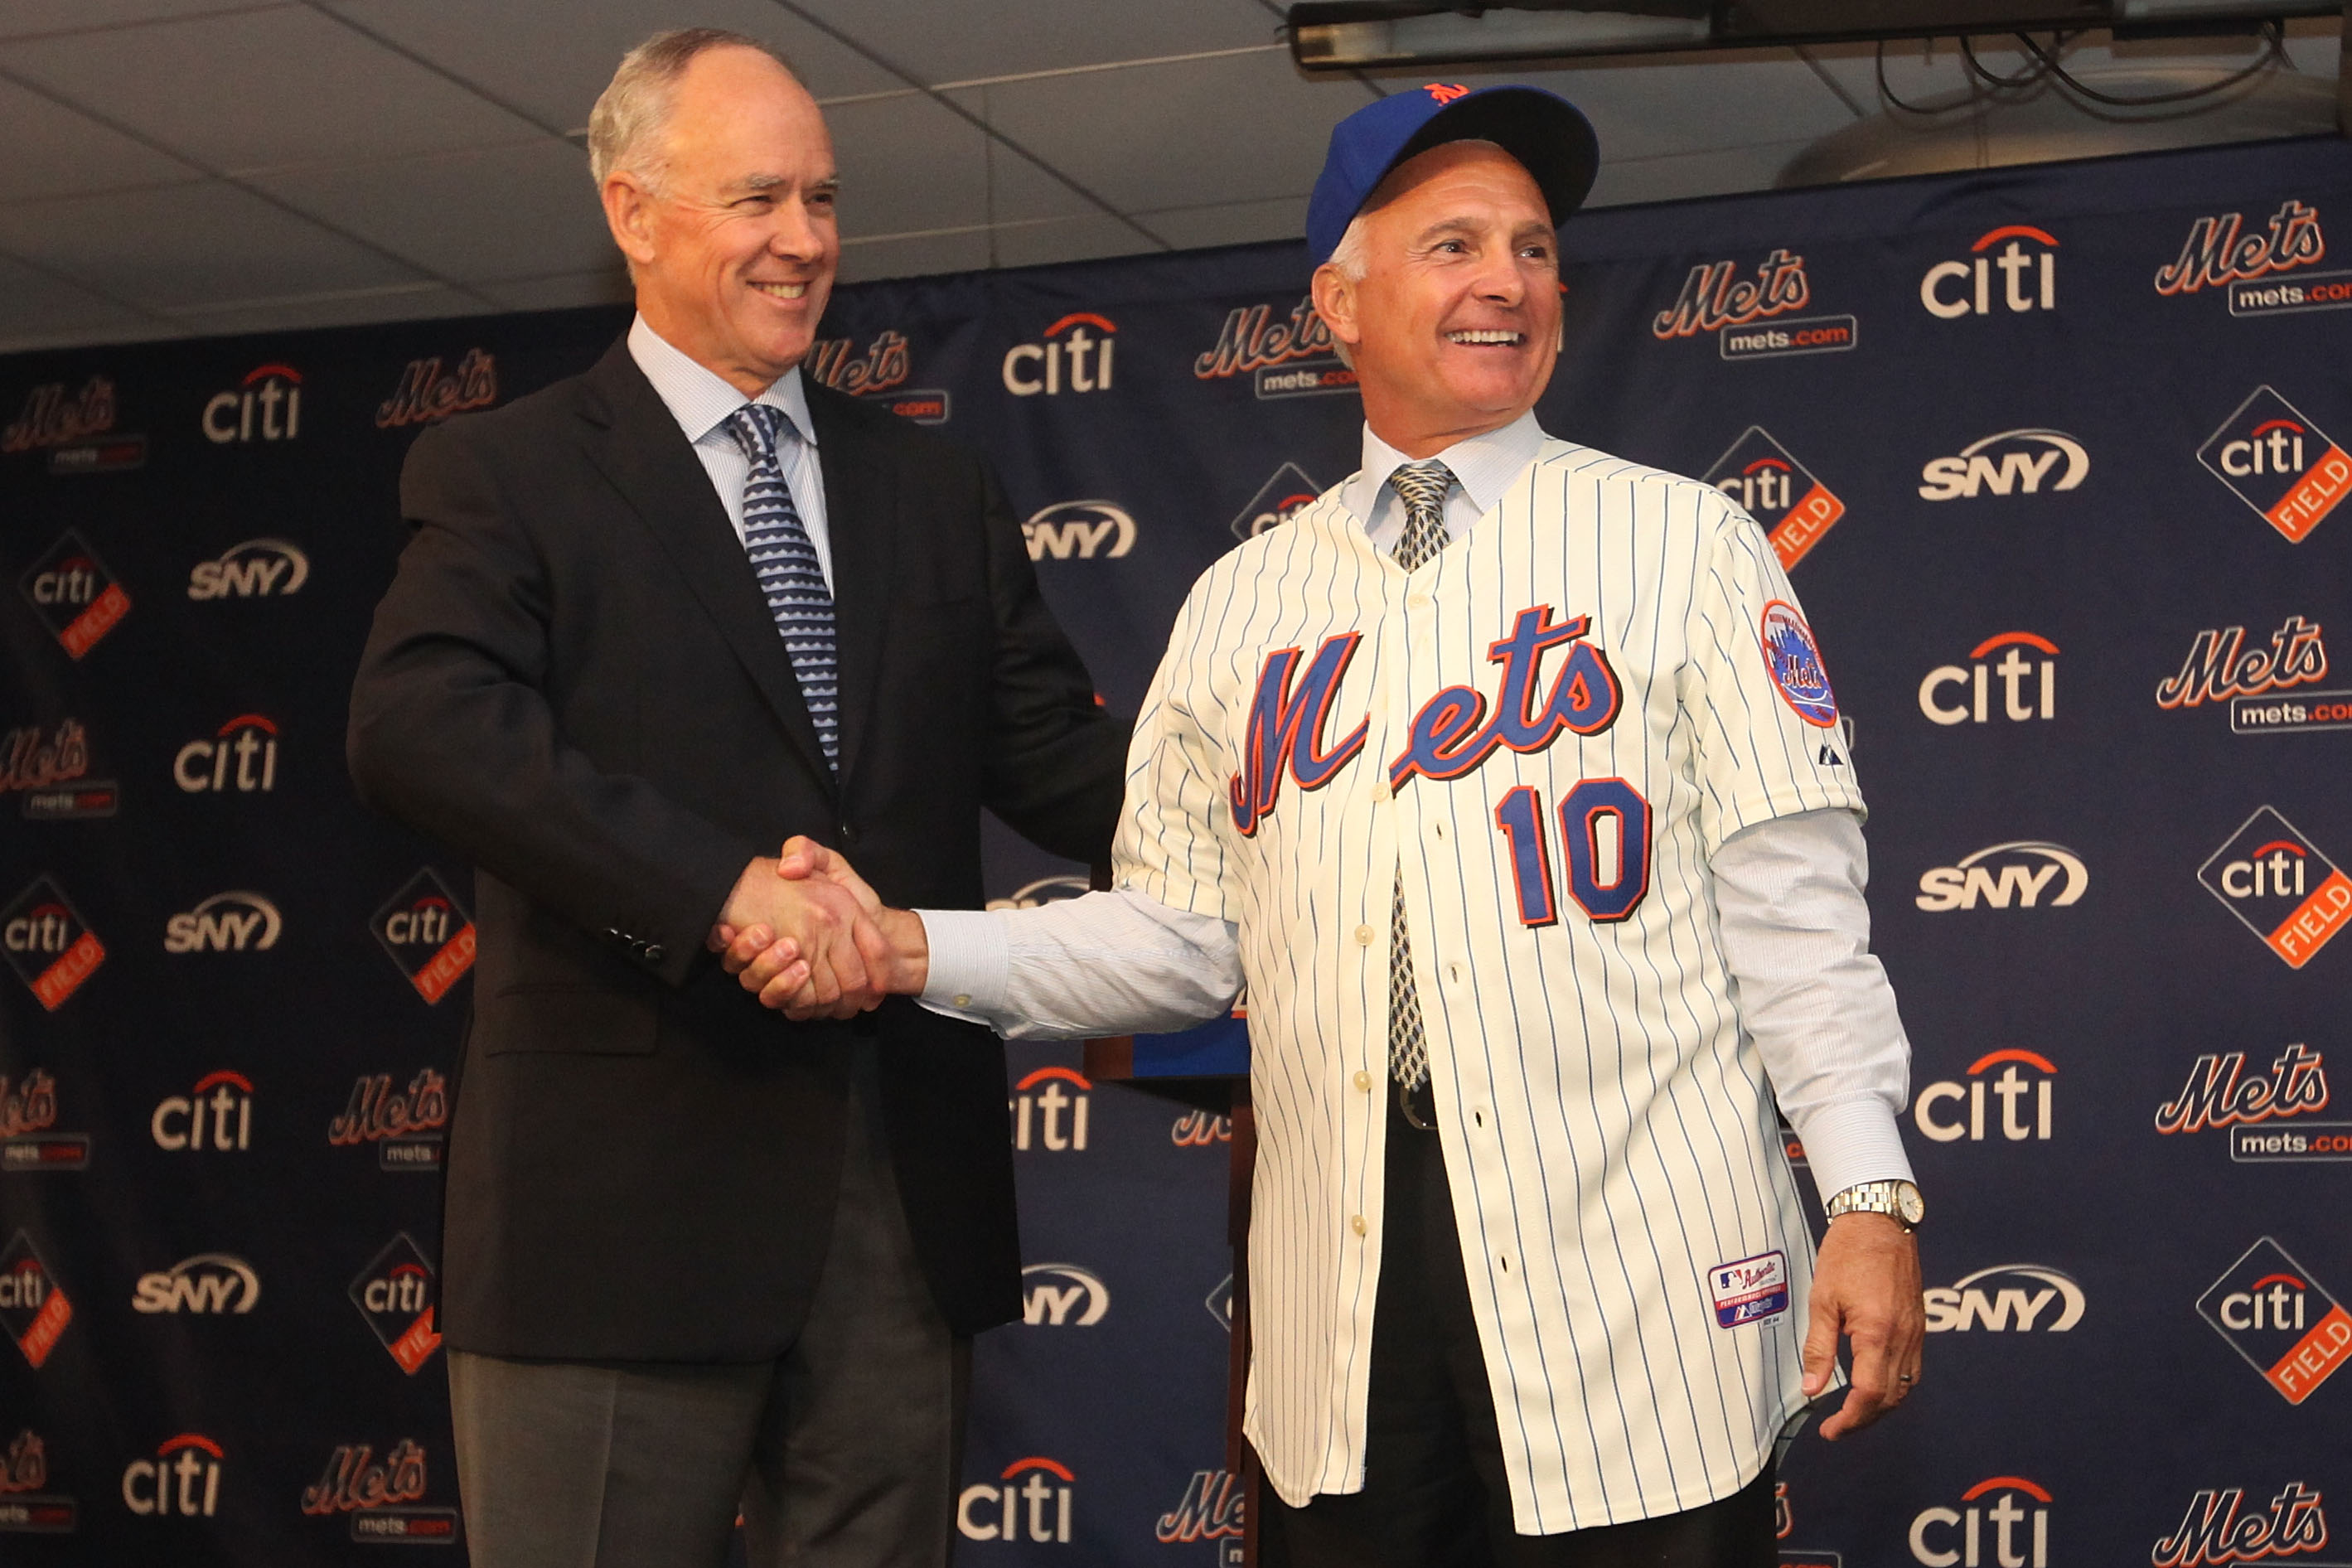 This Week in Mets Quotes: Terry Collins on the state of the team